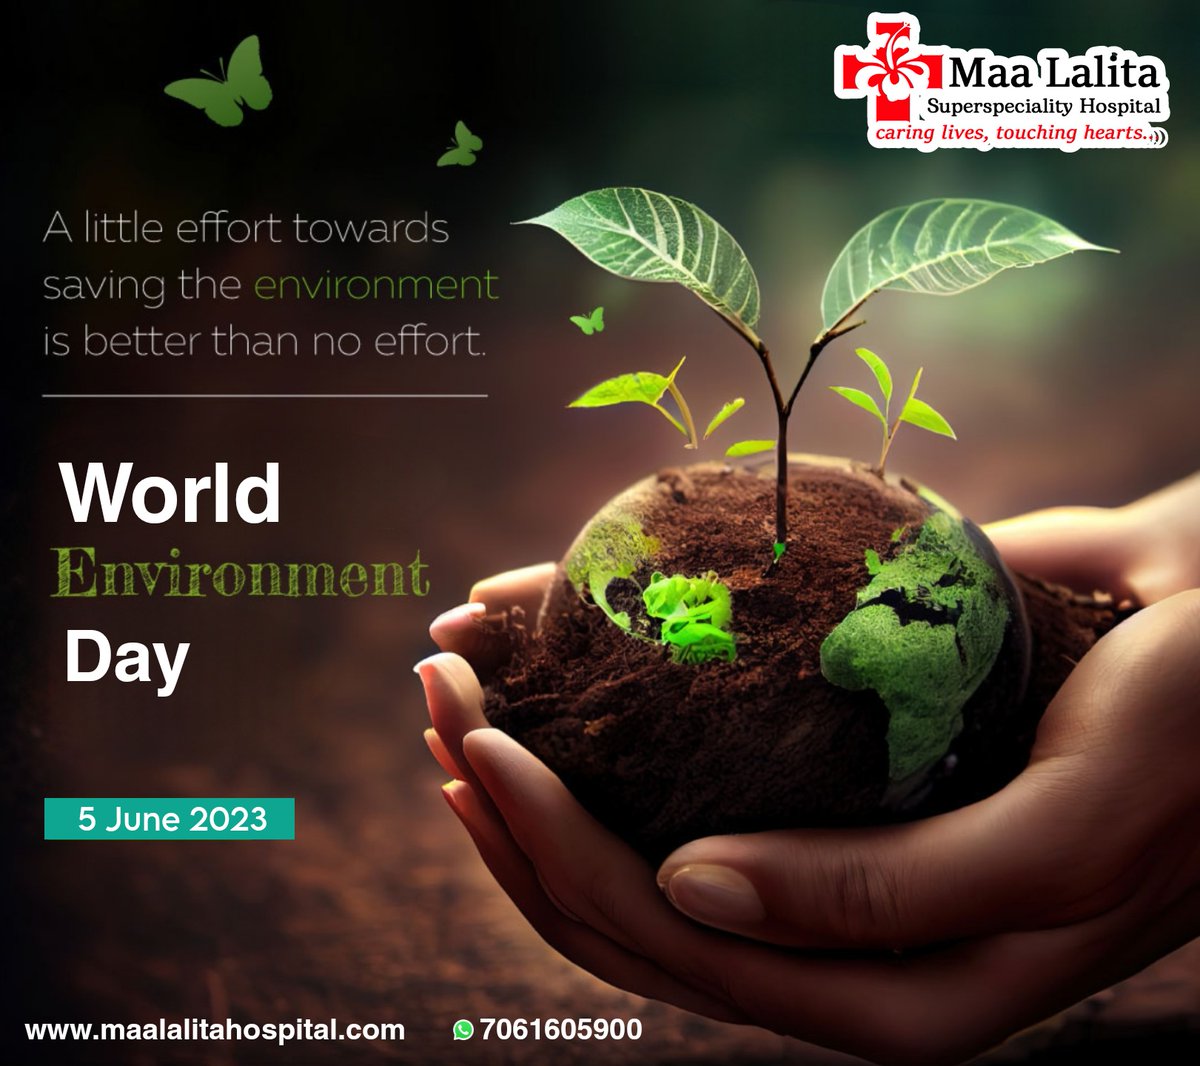 Let's cherish and protect our beloved planet for generations to come.
Wishing a Happy Environment Day to all.
#WorldEnvironmentDay #WorldEnvironmentDay2023 
#EnvironmentDay  #motherearth  #earth #maalalitahospital  #hospital #multispecialityhospital #Deoghar #Jharkhand